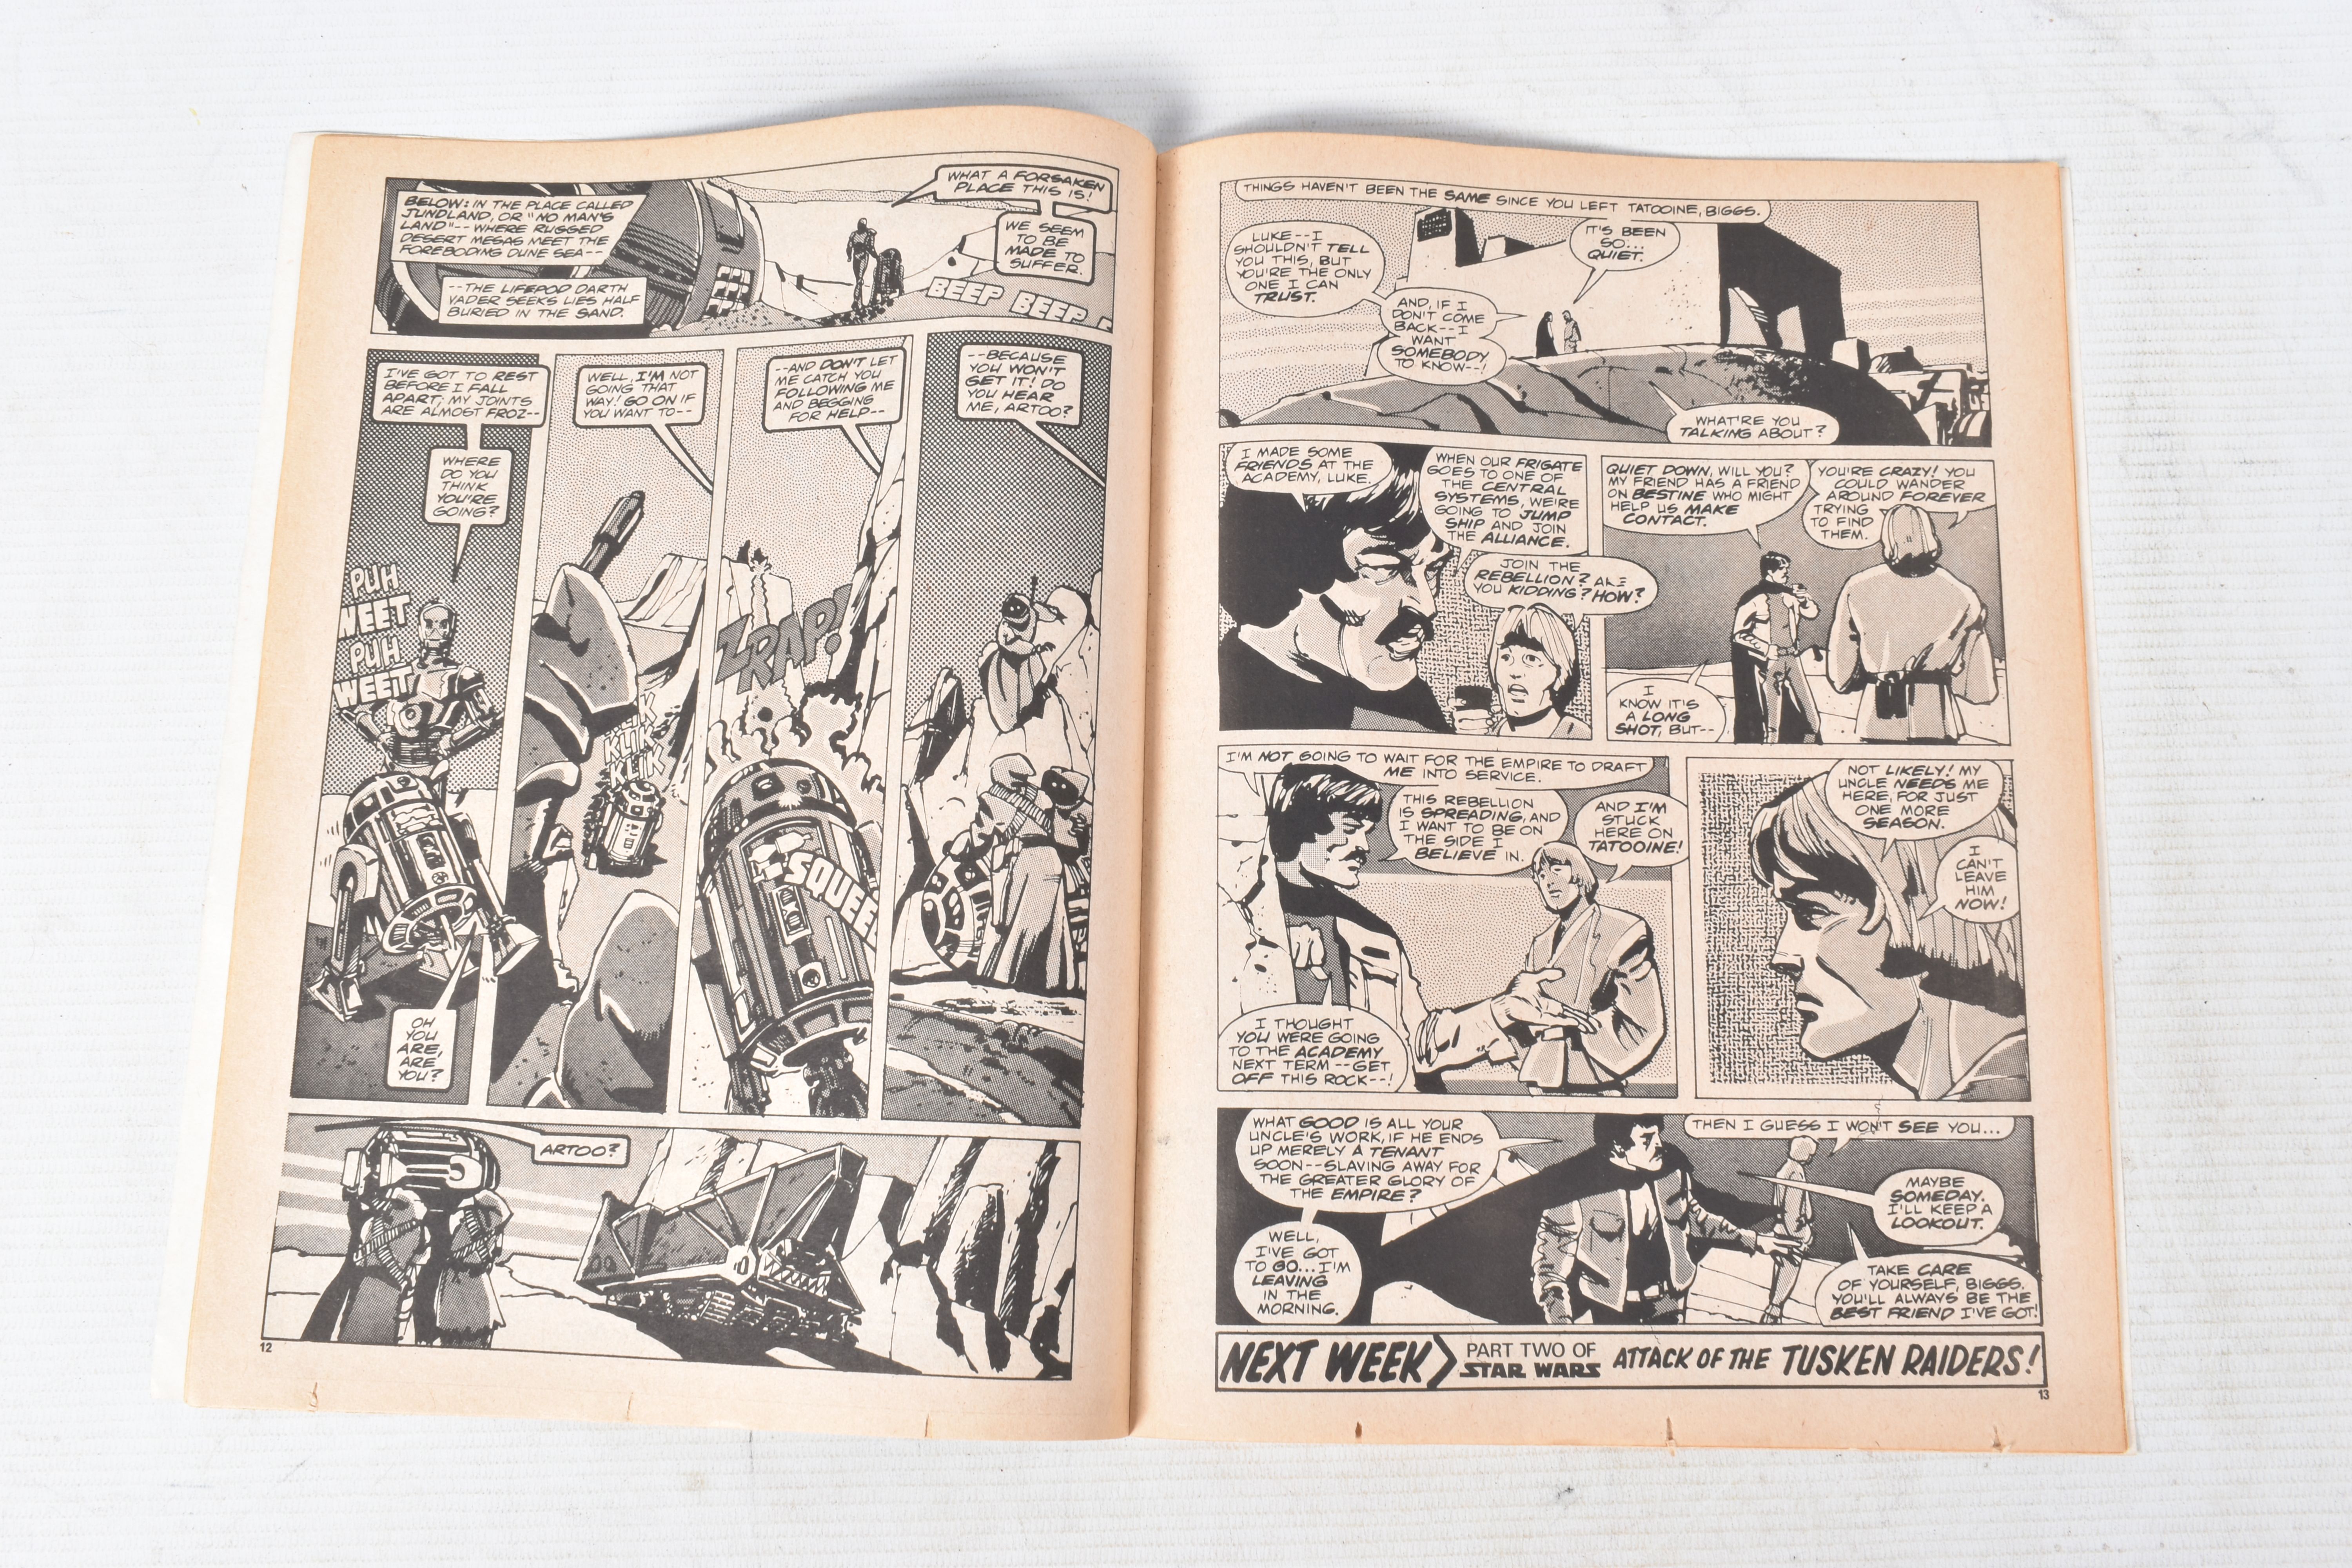 A MARVEL COMICS GROUP STAR WARS WEEKLY NO. 1 MAGAZINE, missing its free toy, dated Feb 8 1978, front - Image 6 of 15